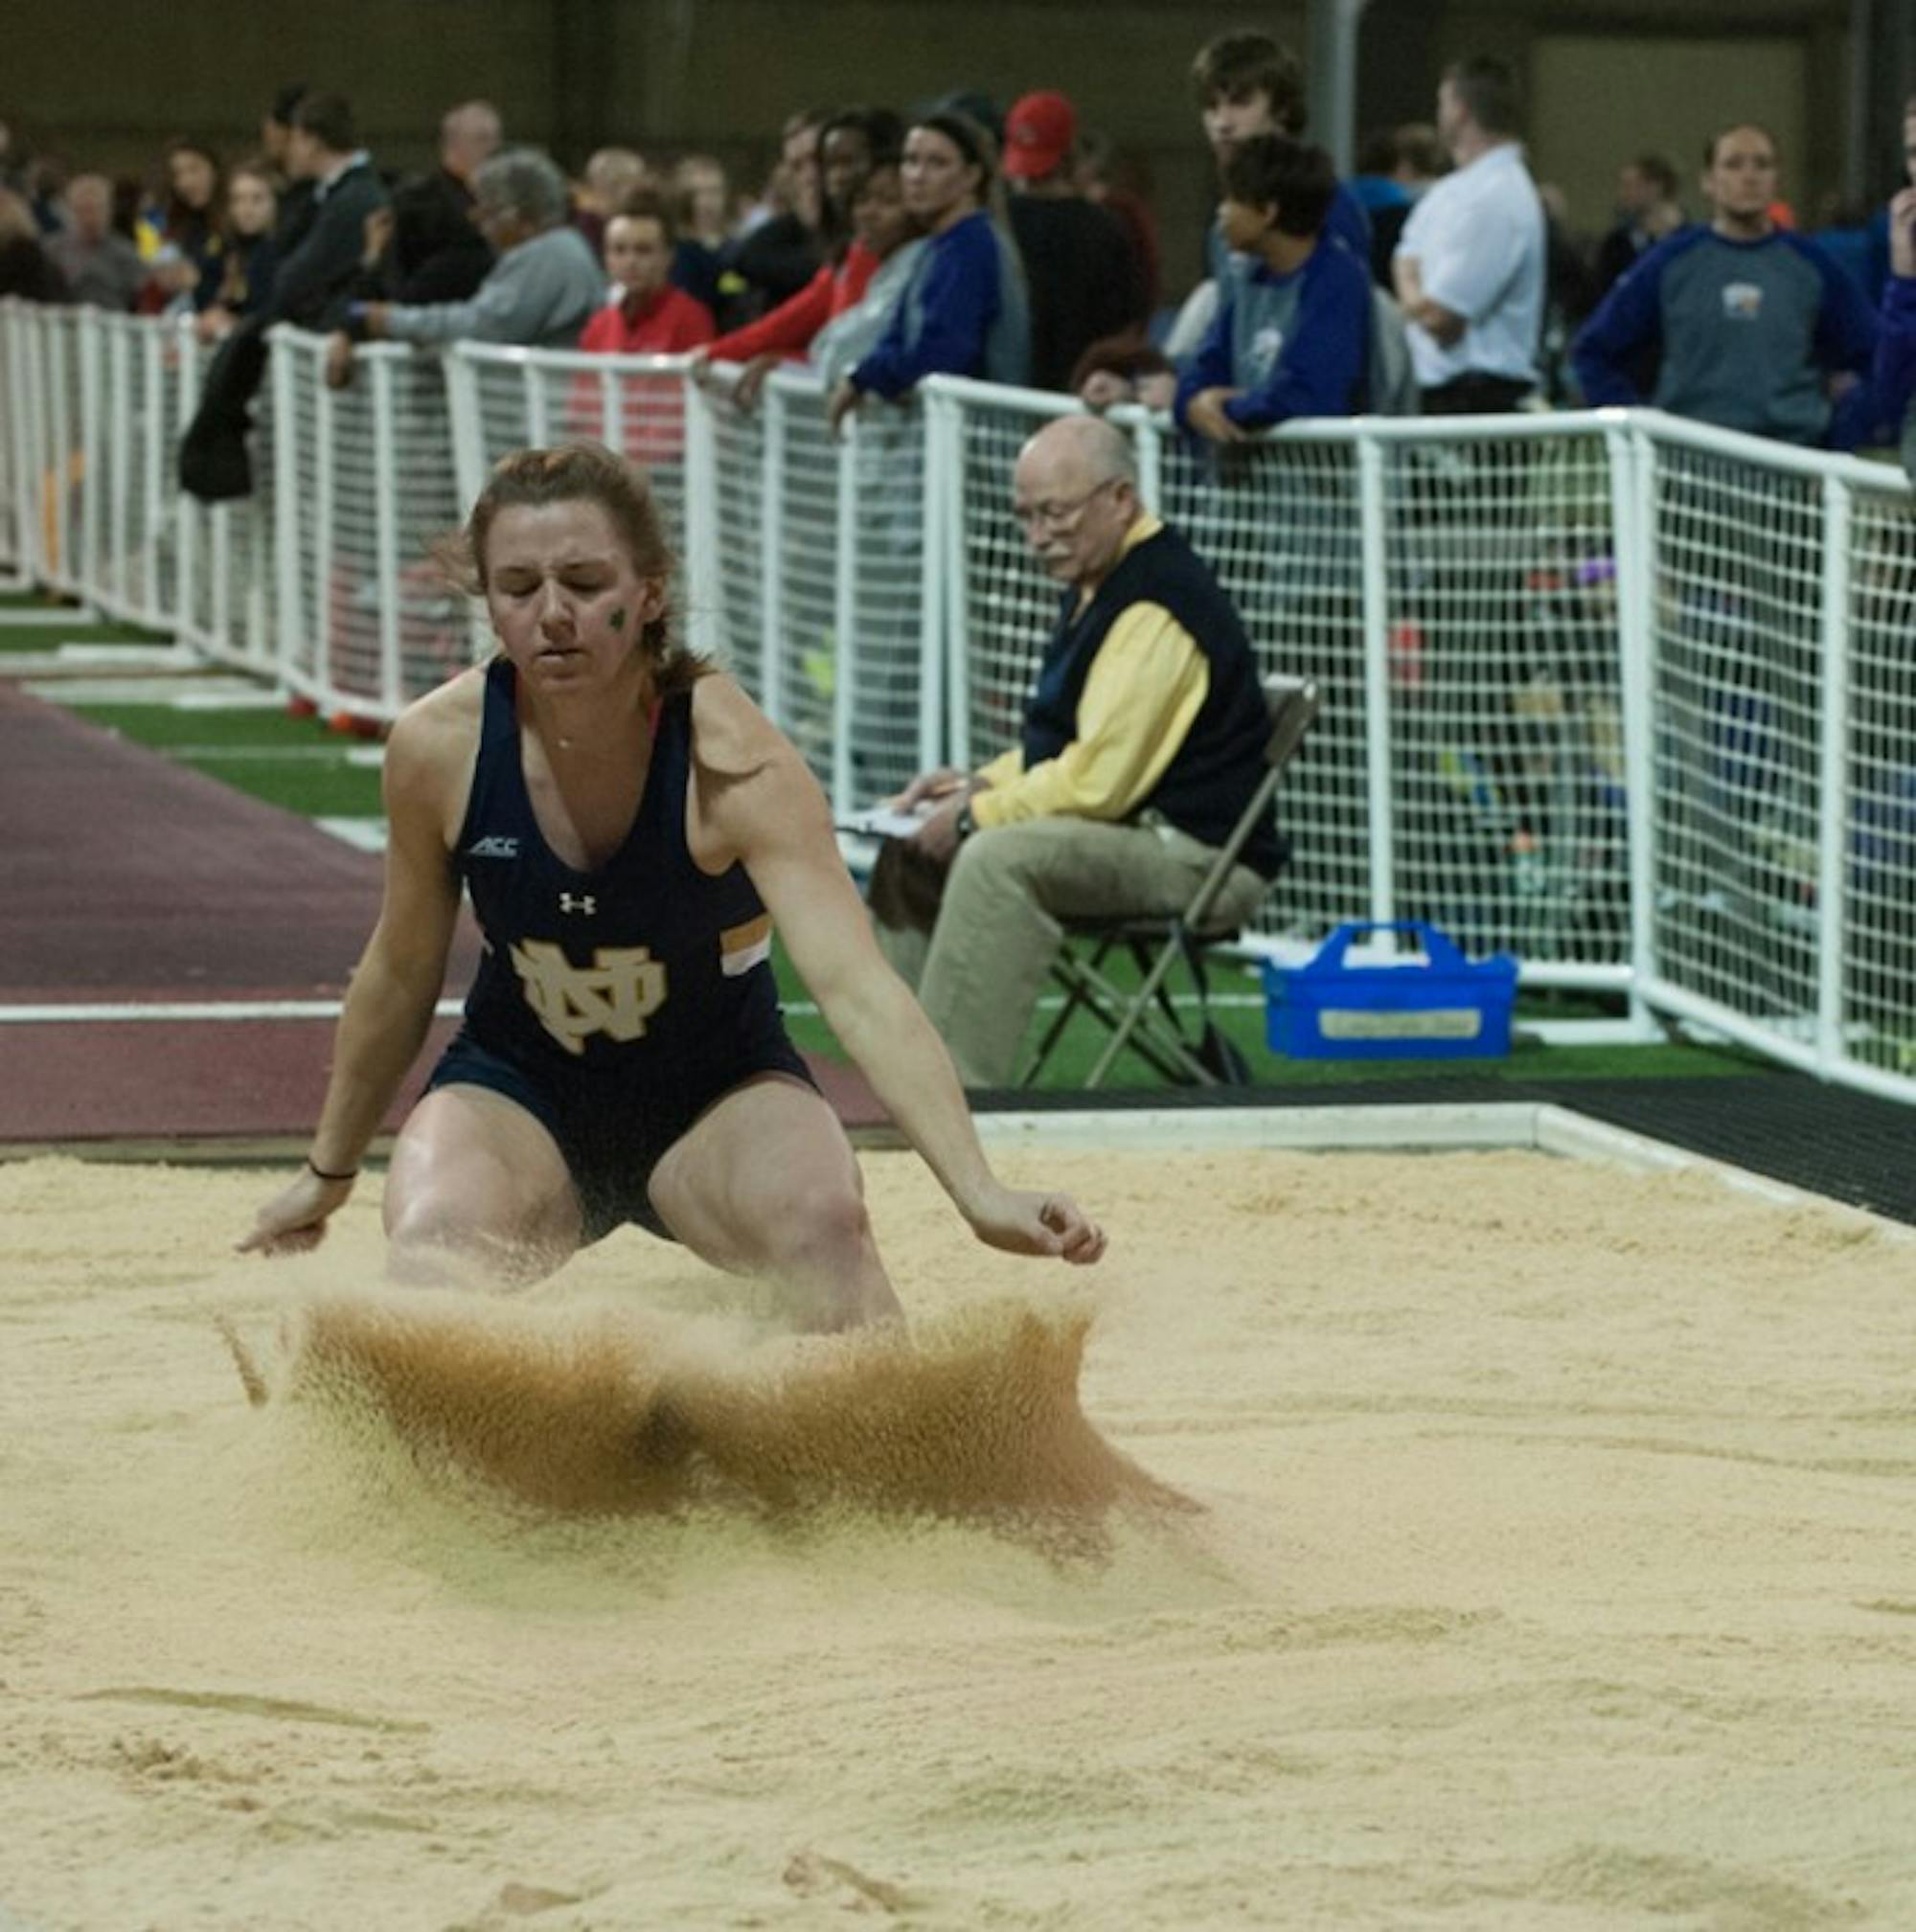 Sophomore jumper Emily Carson lands one of her long jumps at the Meyo Invitational on Feb. 6 at Loftus Sports Center.